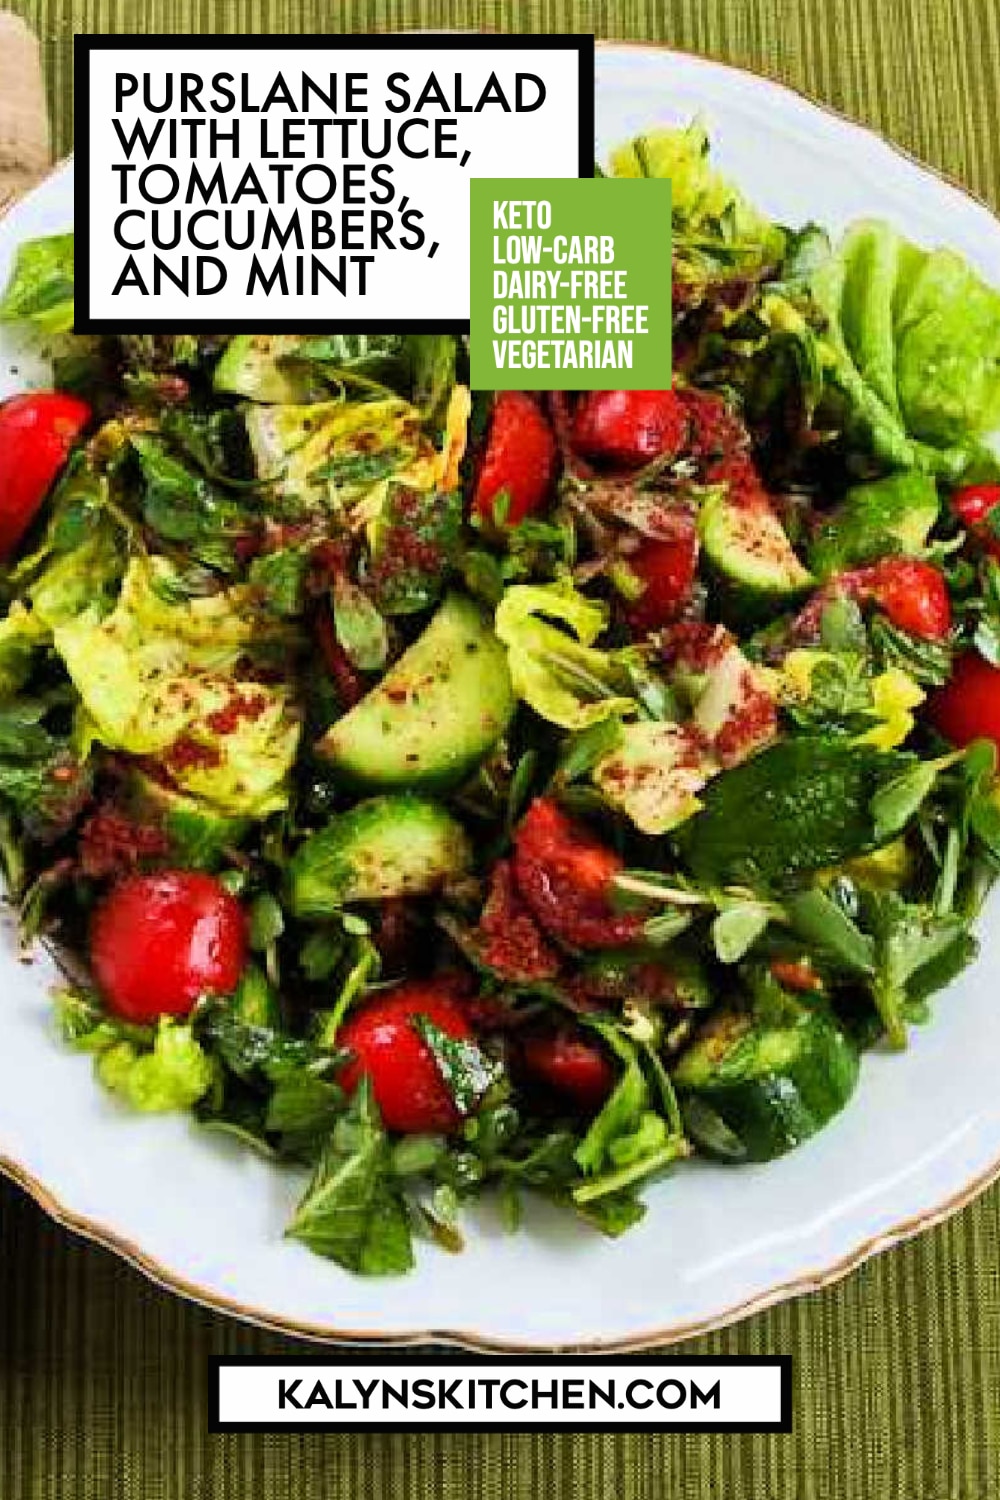 Pinterest image of Purslane Salad with Lettuce, Tomatoes, Cucumbers, and Mint